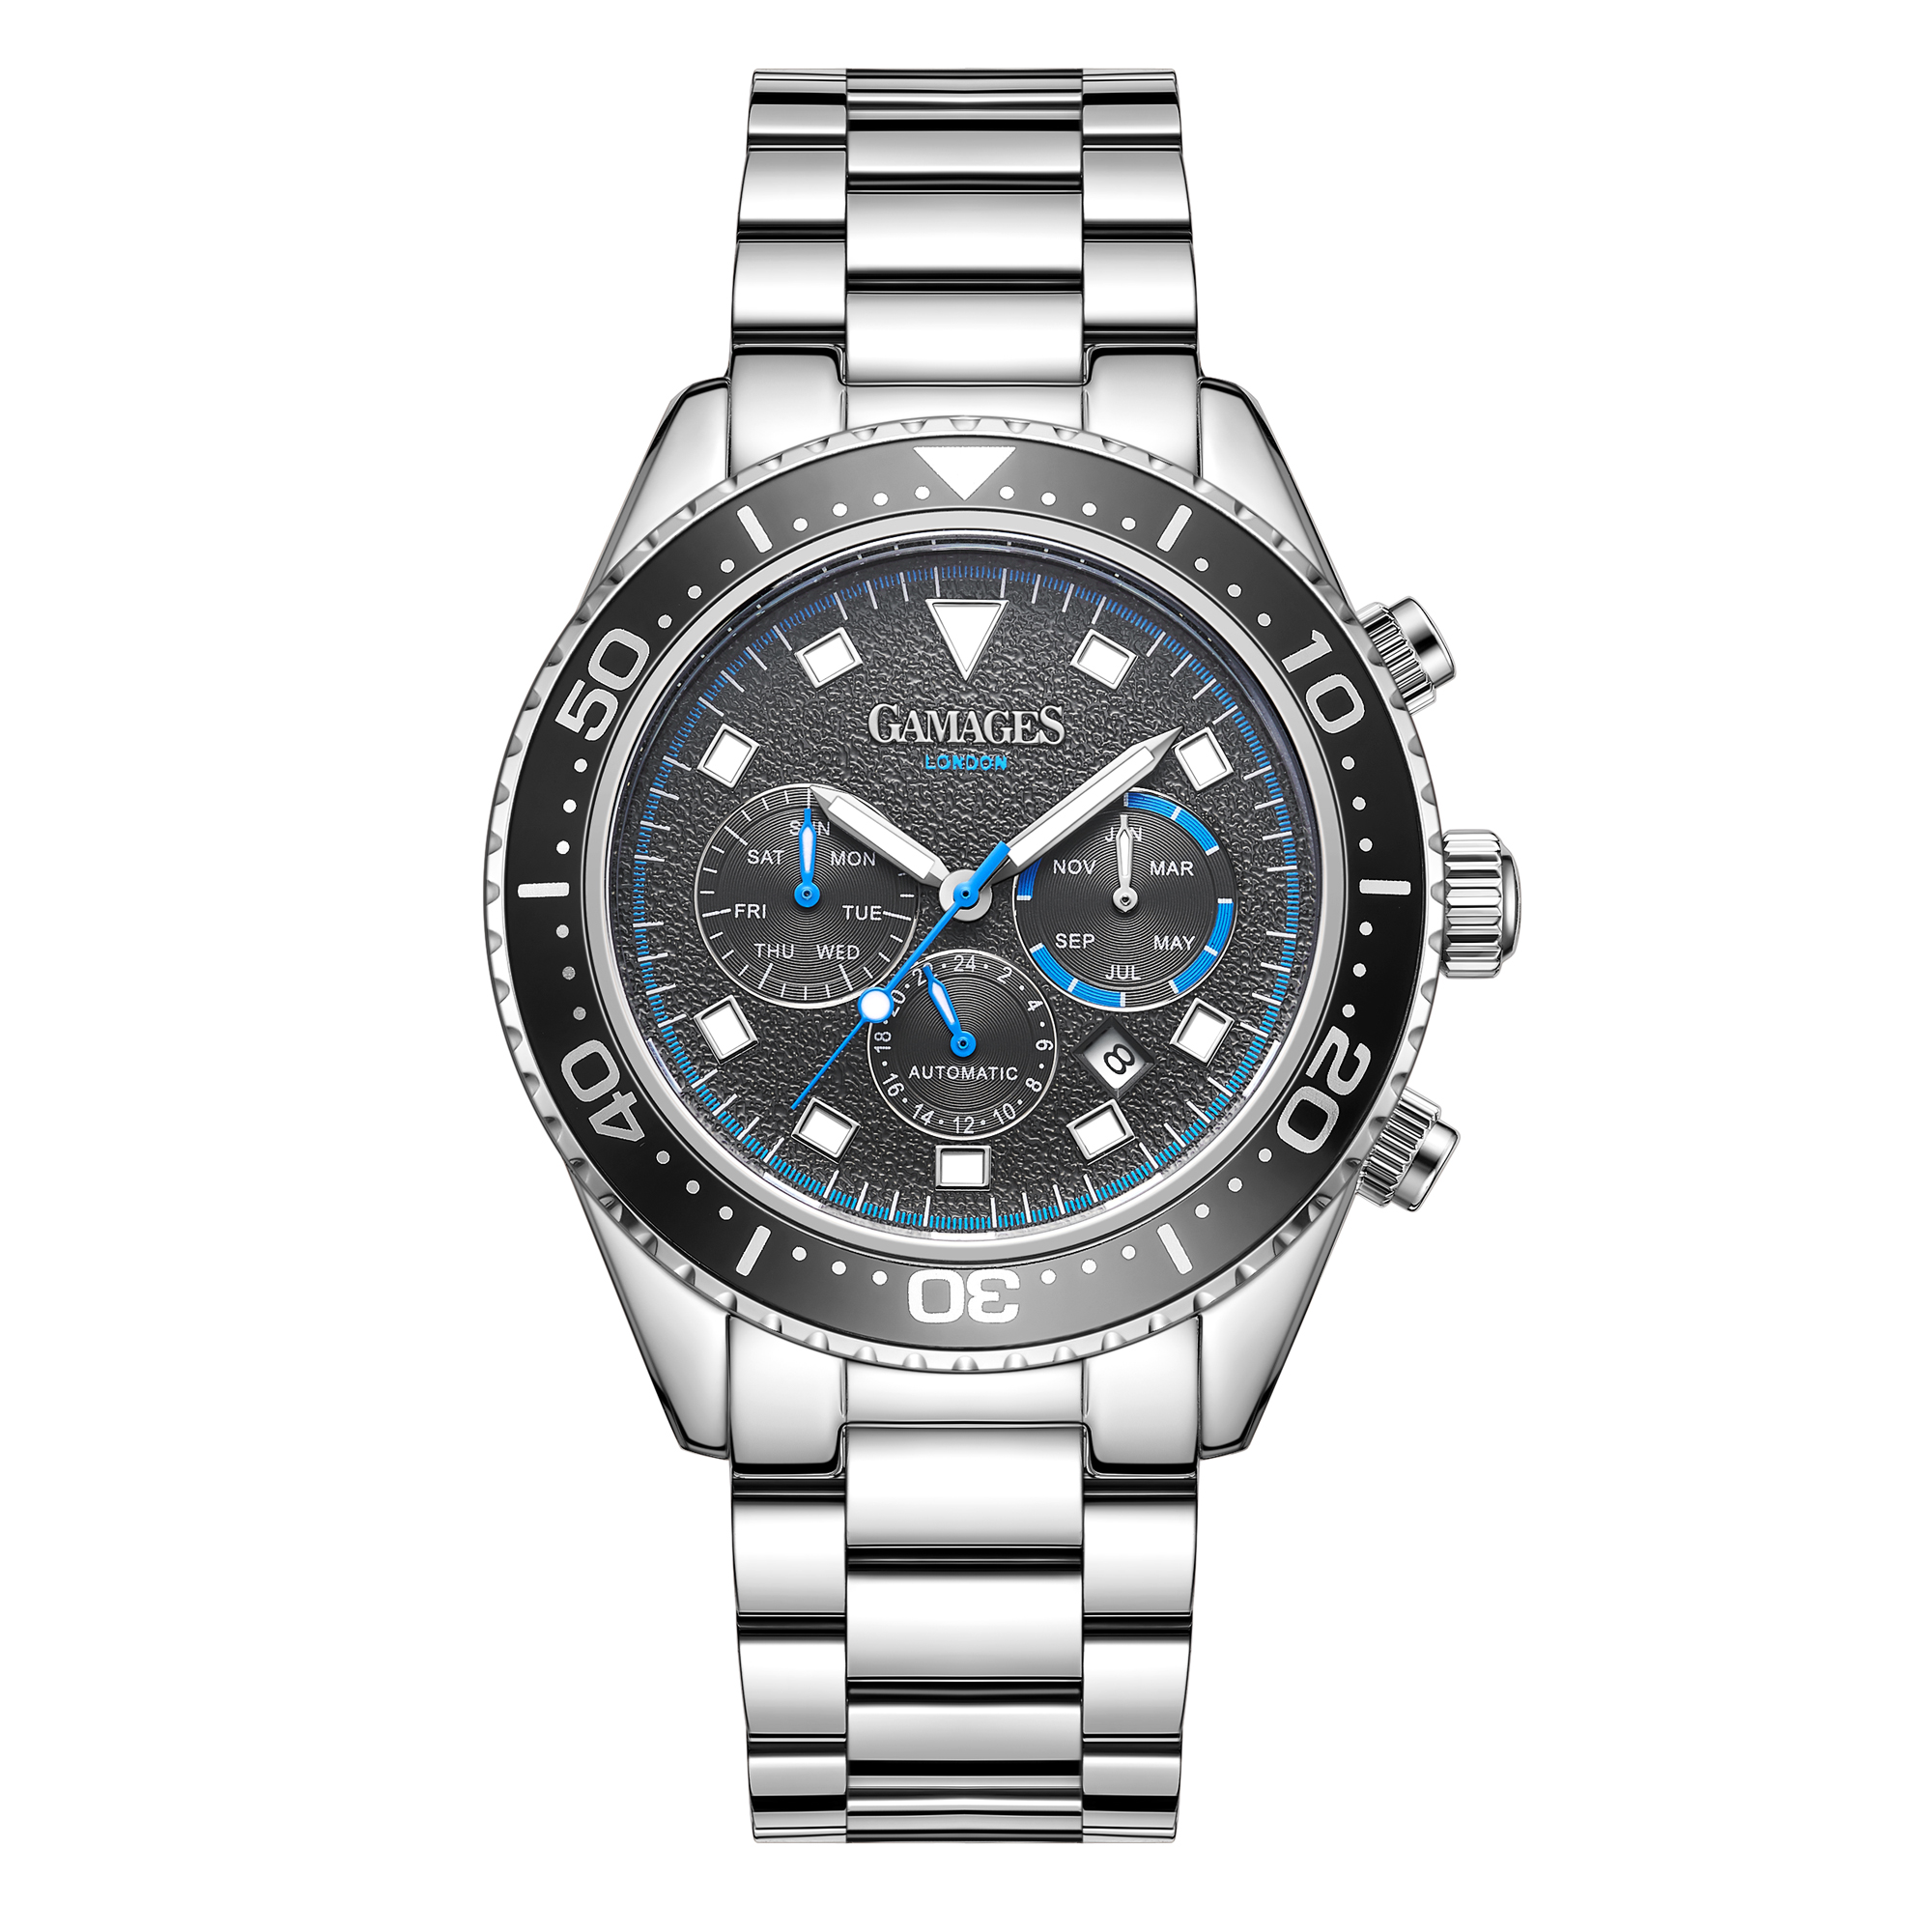 Ltd Edition Hand Assembled Gamages Allure Automatic Steel – 5 Year Warranty & Free Delivery